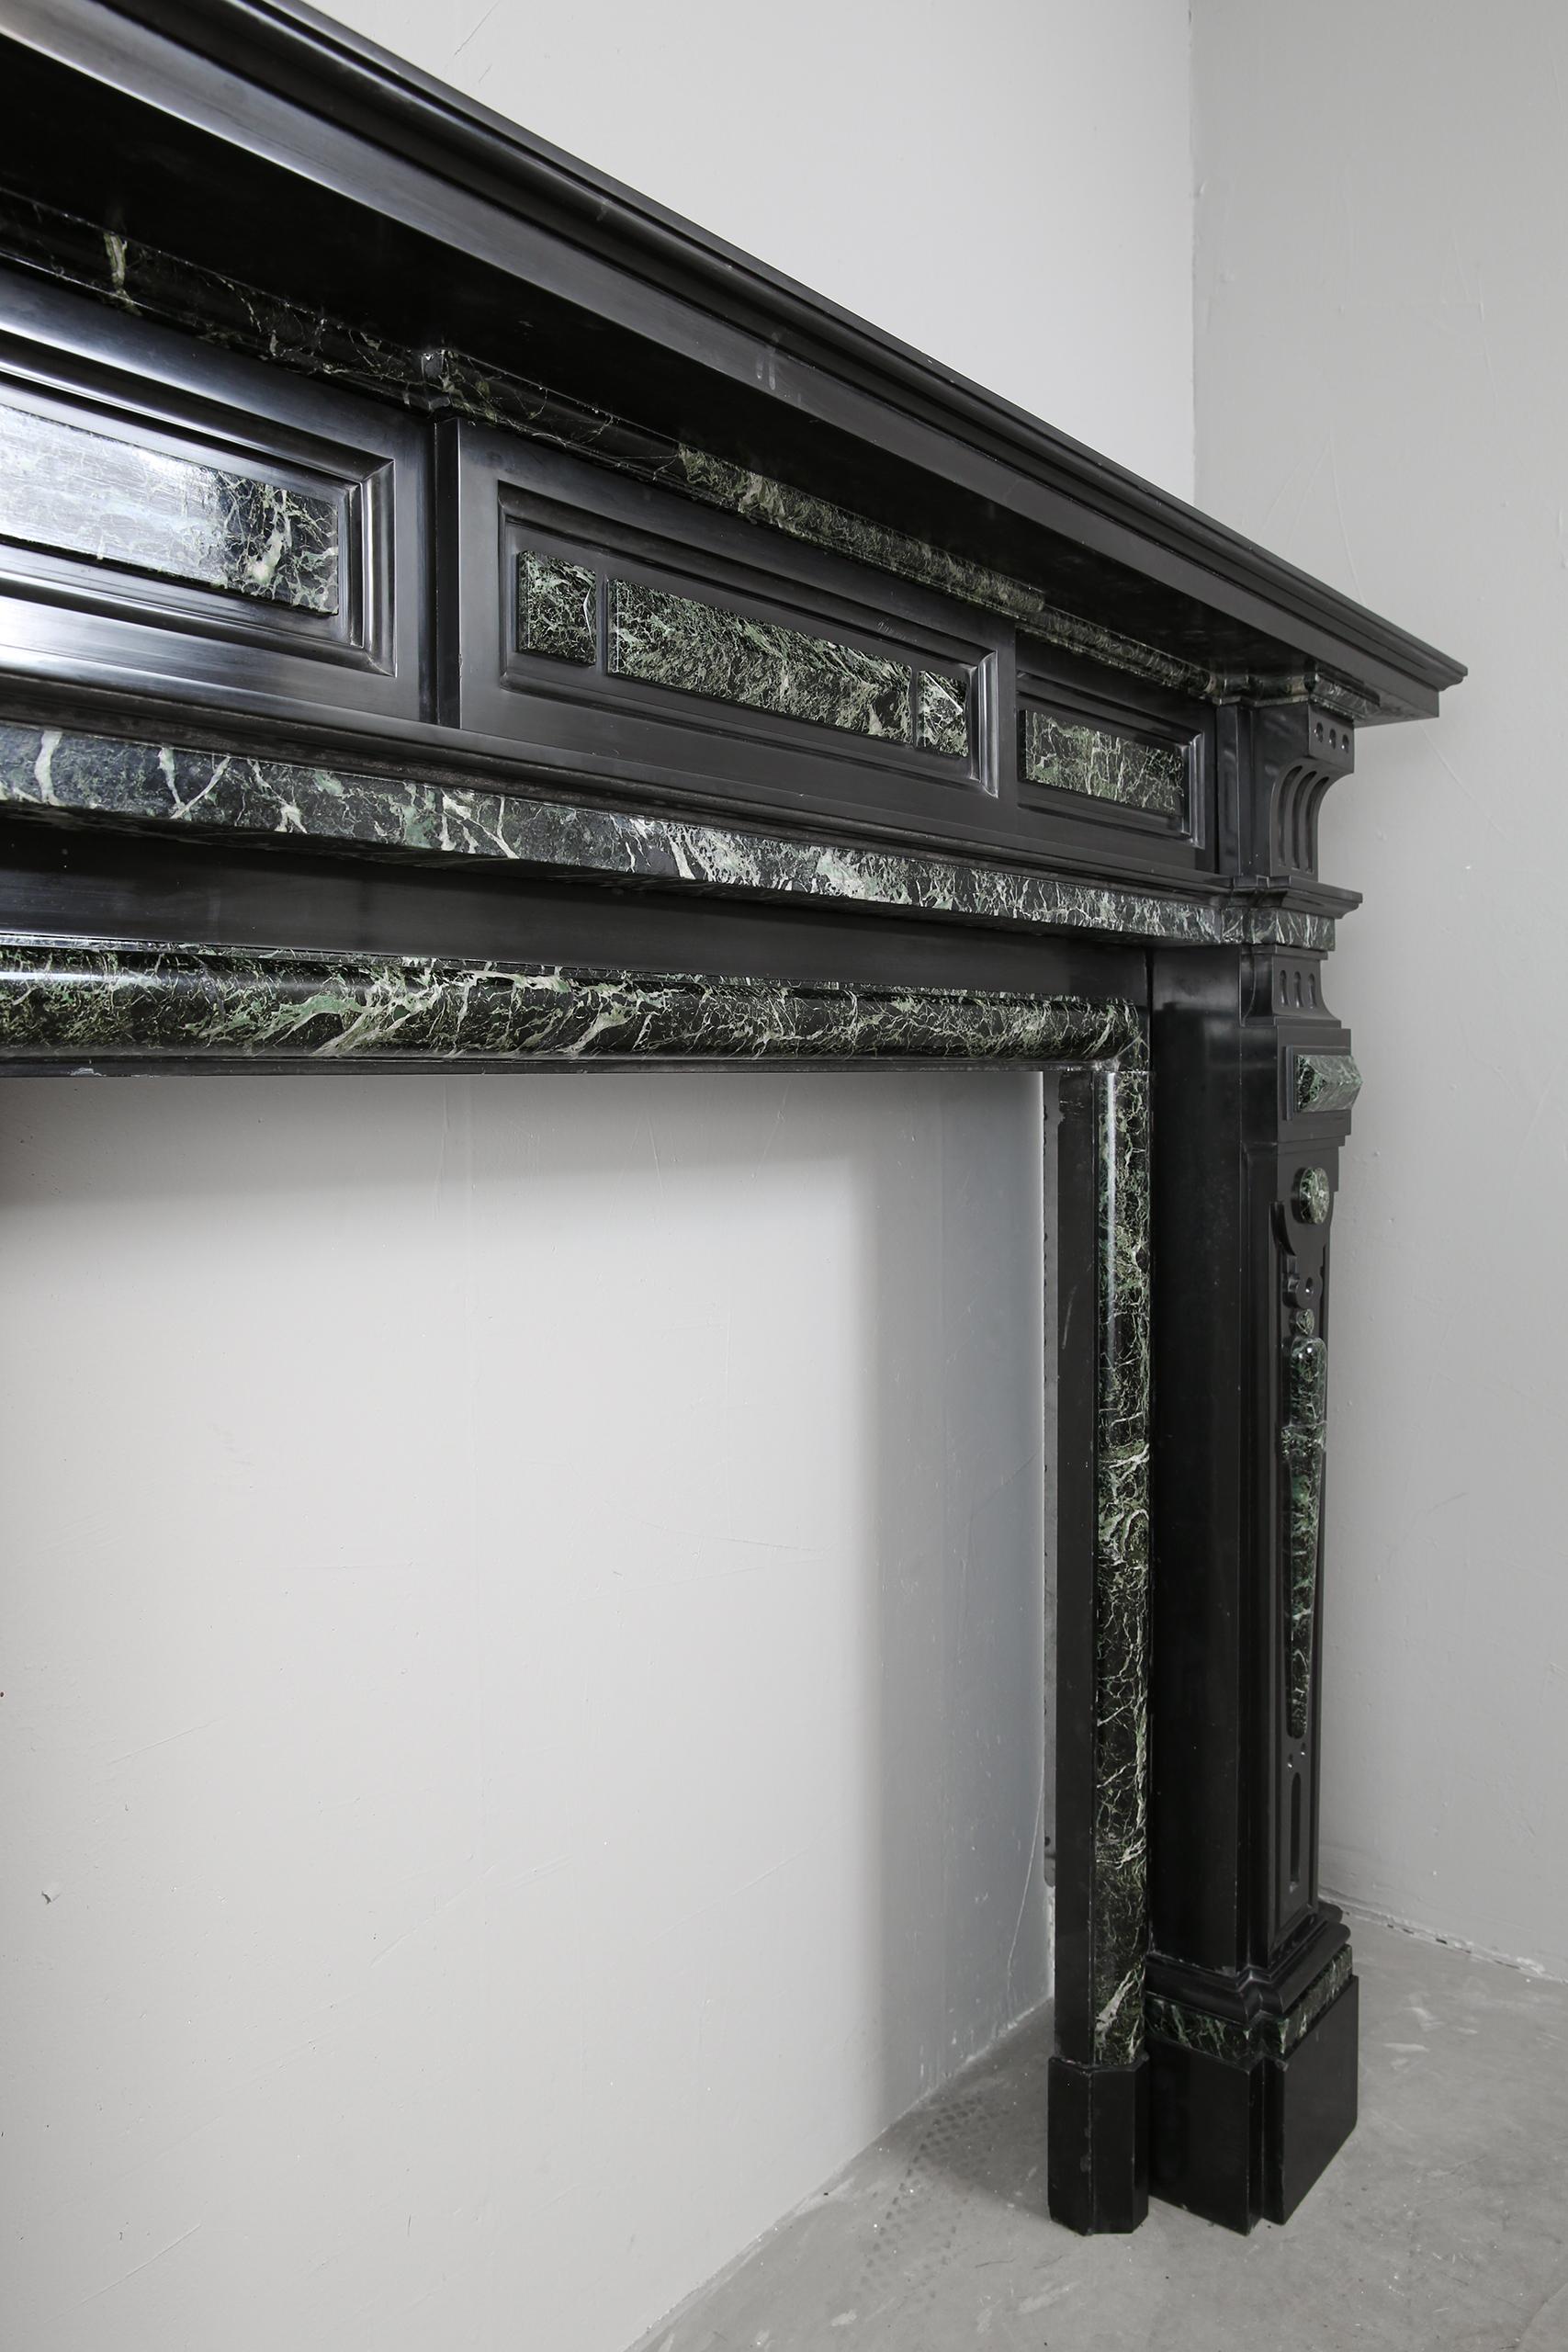 Grand neoclassical black and green marble antique fireplace surround.
The quality of the marble on this fireplace is exceptional. The Noir de Mazy black marble has a shine that is not common. The deep shine gives this piece an exceptional